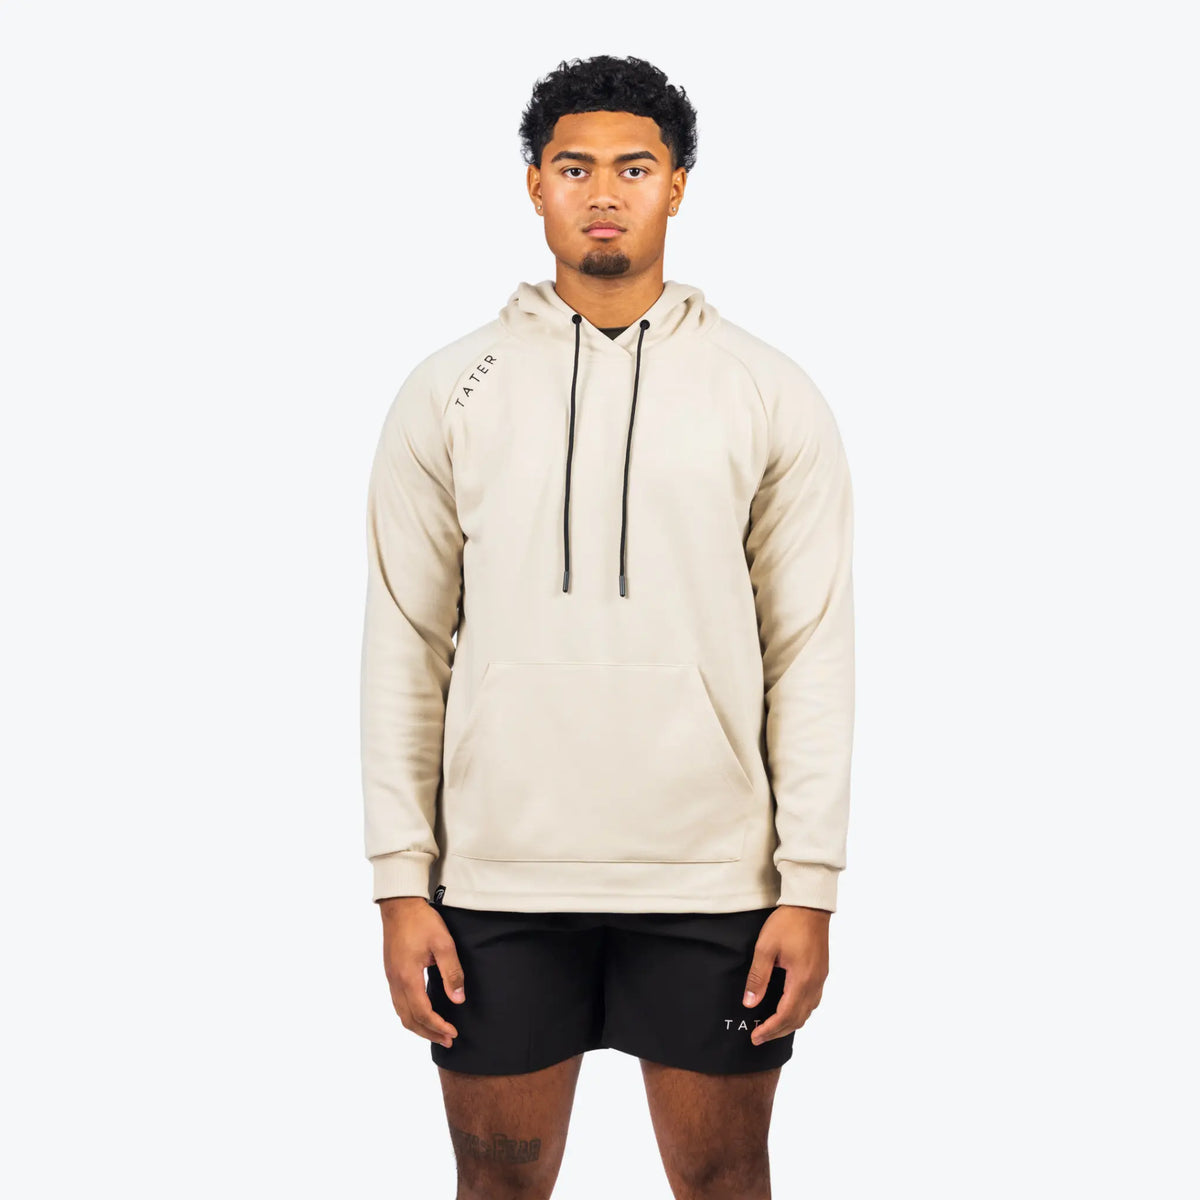 The uploaded image shows a model wearing a cream-colored professional baseball training hoodie with long sleeves, paired with black shorts, both adorned with the &quot;TATER&quot; logo. The hoodie, which is suitable for both sports training and casual wear, features a drawstring hood and a central front pocket. The style is modern and understated, emphasizing a practical and athletic lifestyle.